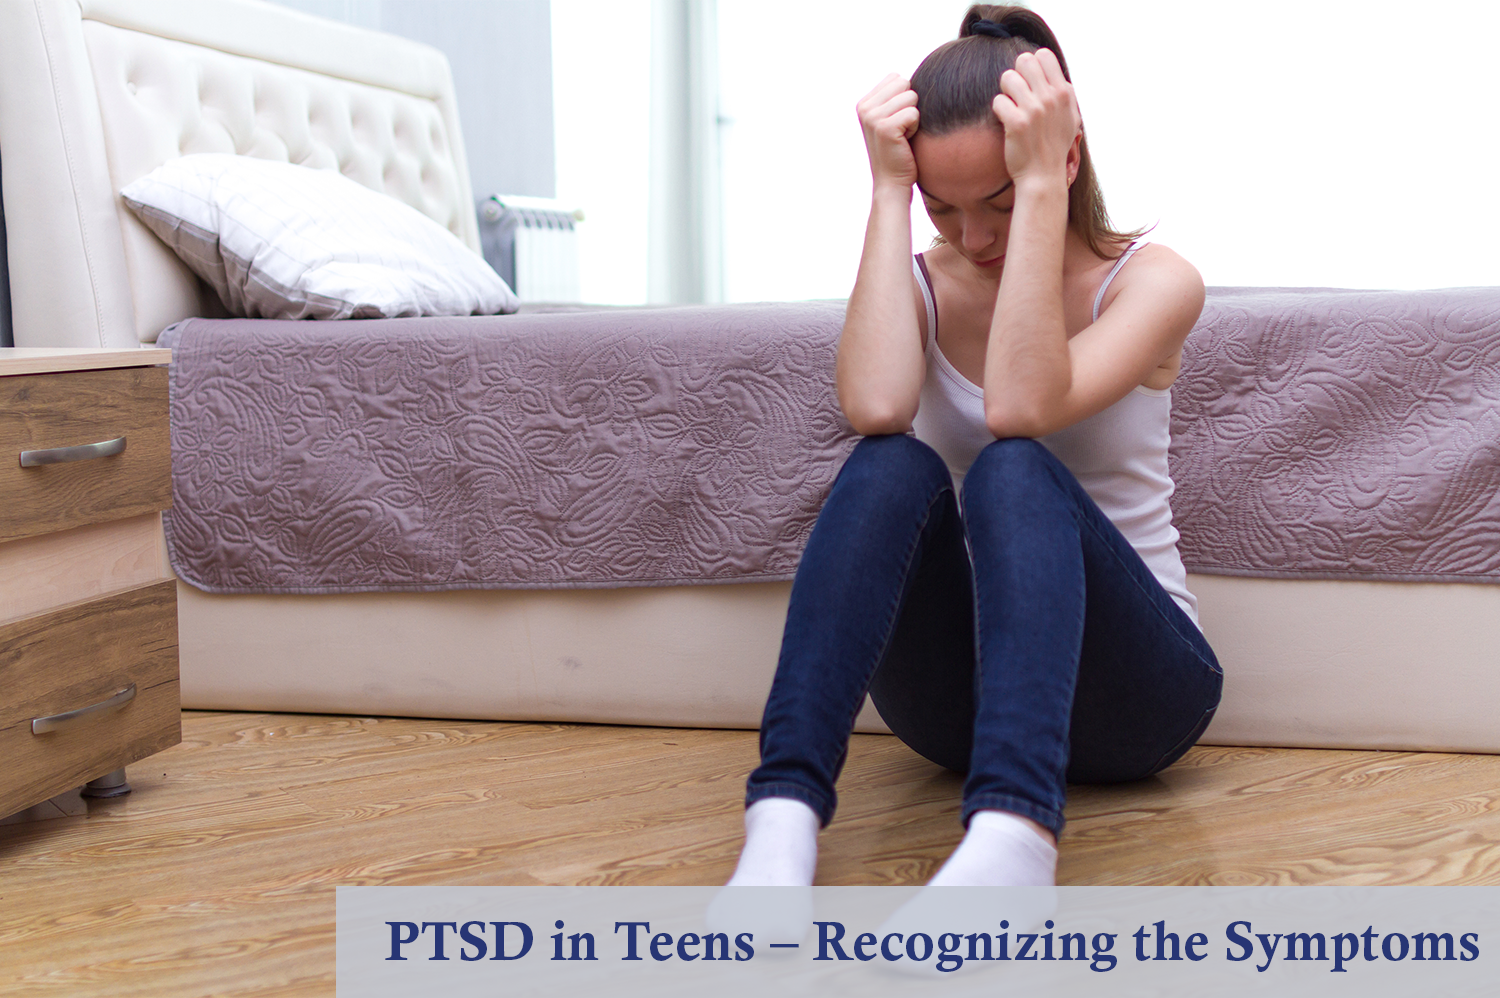 A teen girl sitting on the floor of their bedroom with her head in her hands - an example of PTSD in teens.